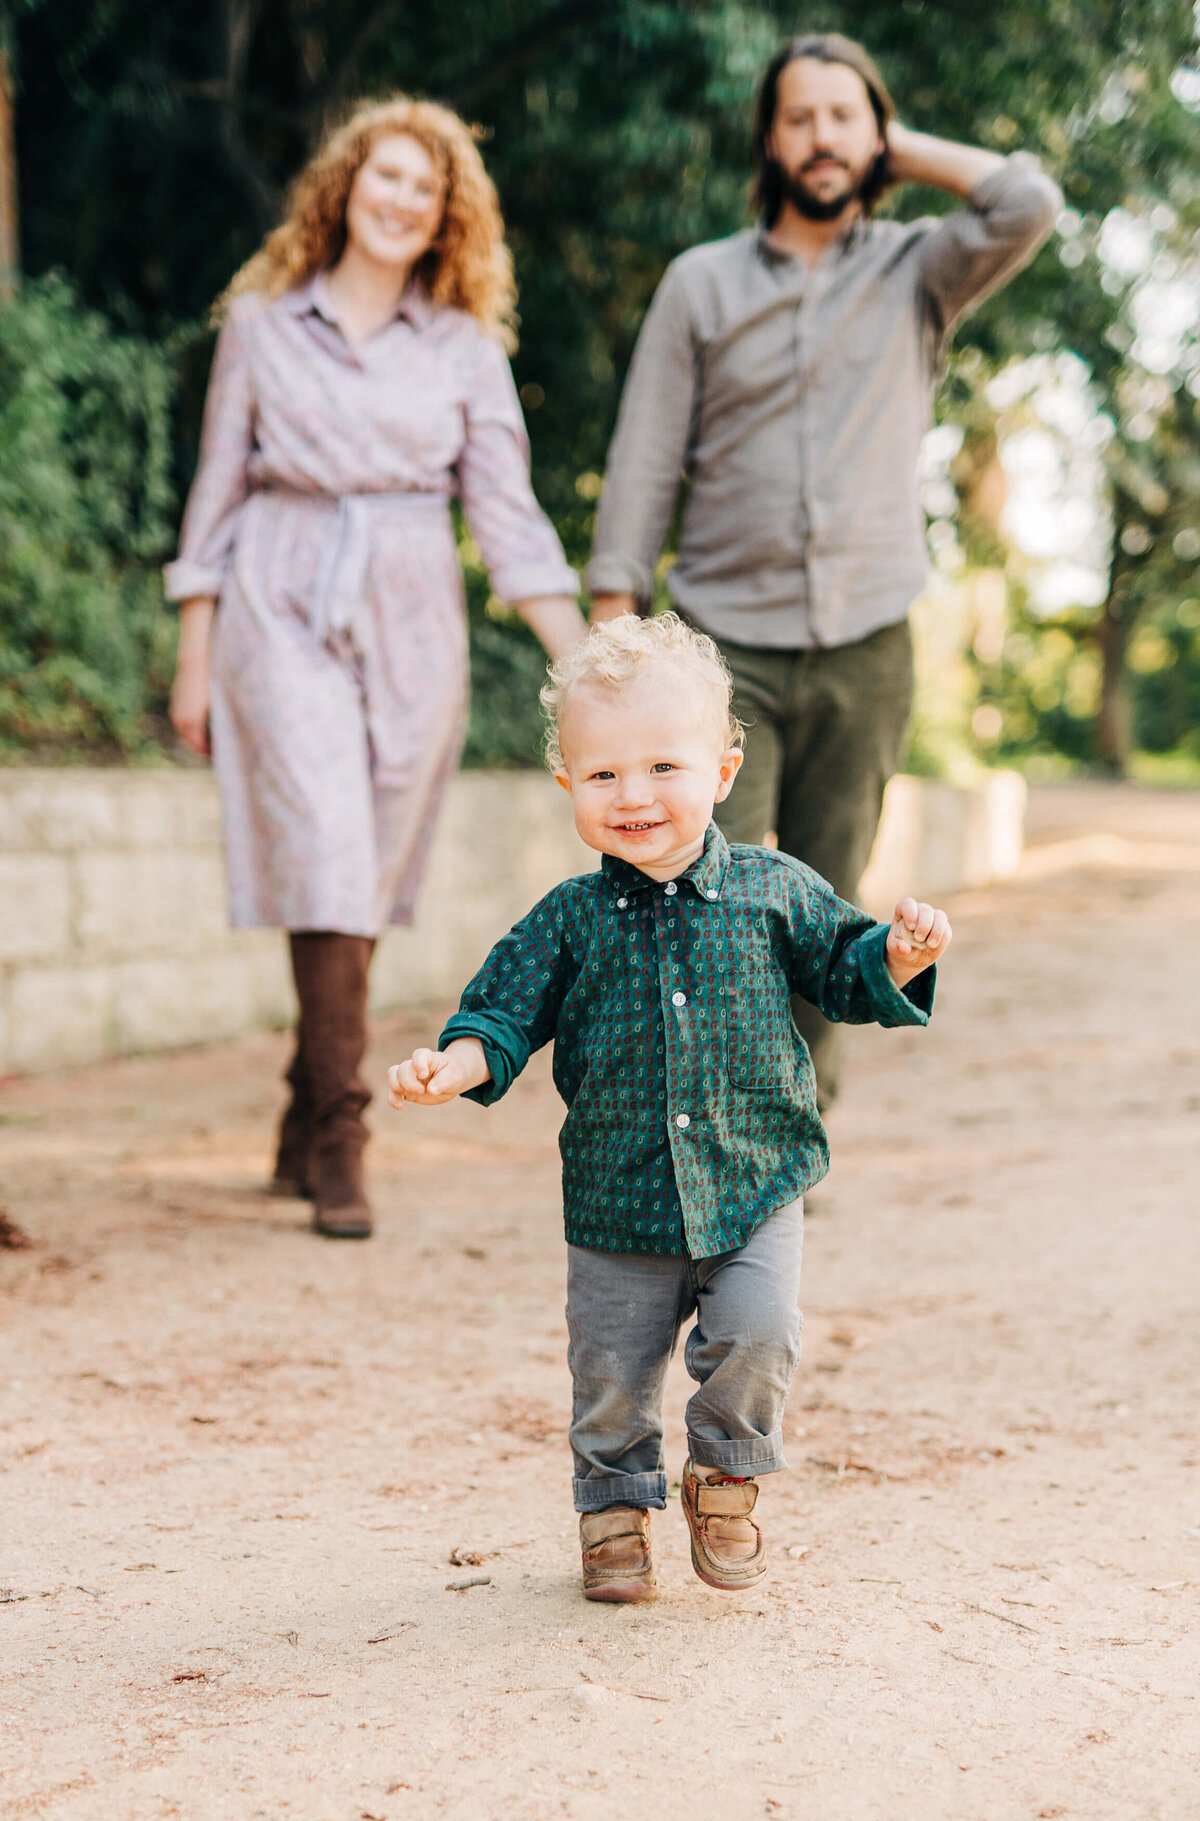 Baby runs to camera during family photography session by Neide Barbosa